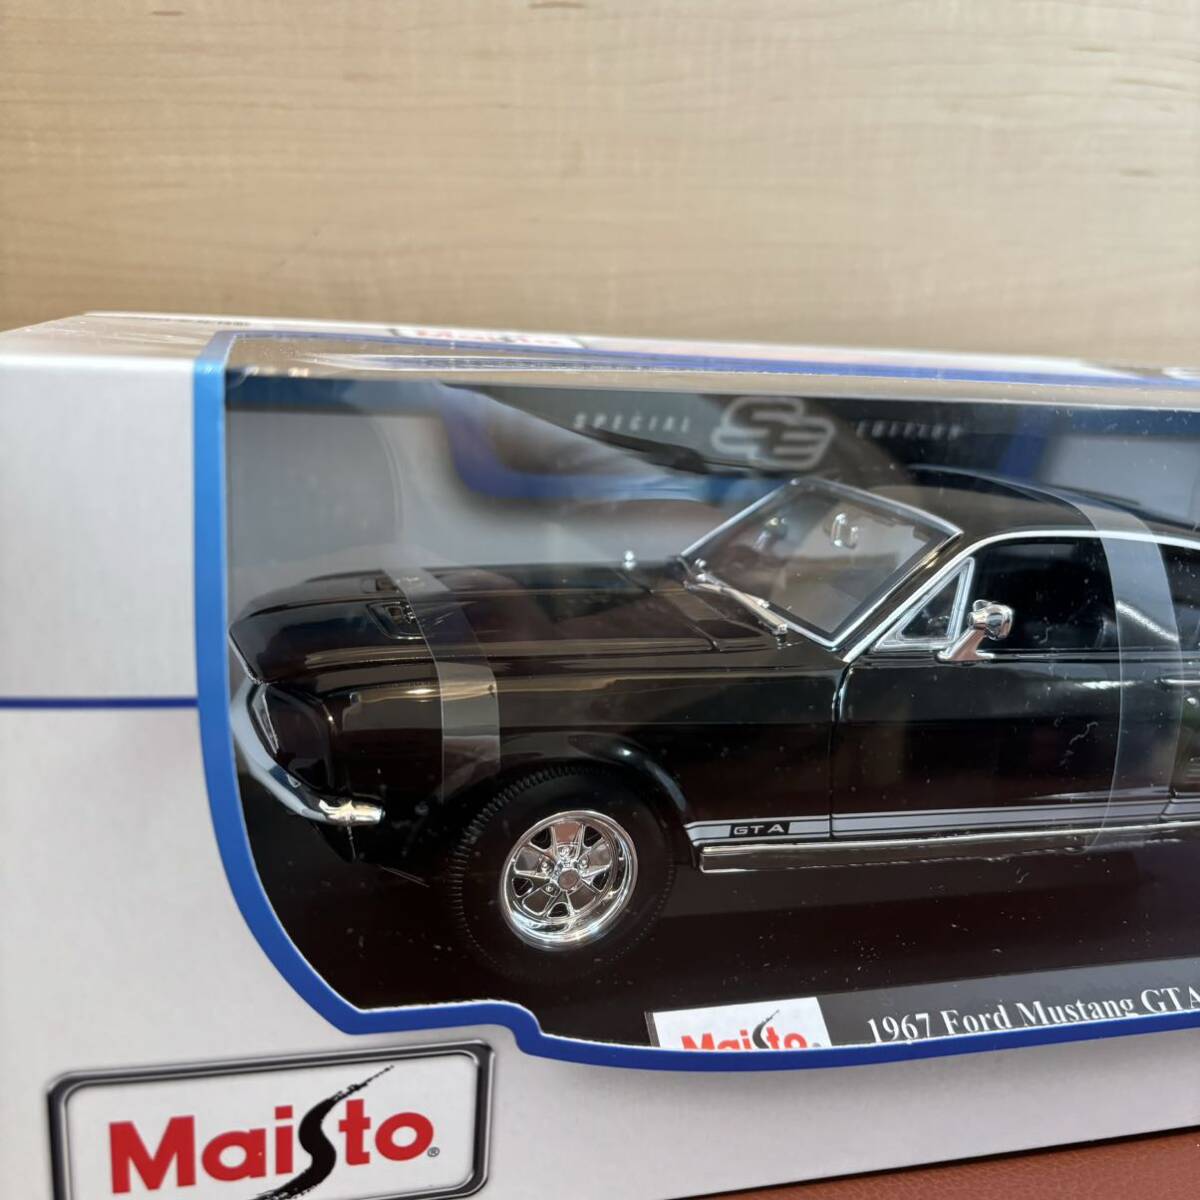  new goods cheap postage Maisto Maisto 1/18 1967 Ford Mustang GTA Fastback Mustang inspection ) Ame car Chevrolet Ford 